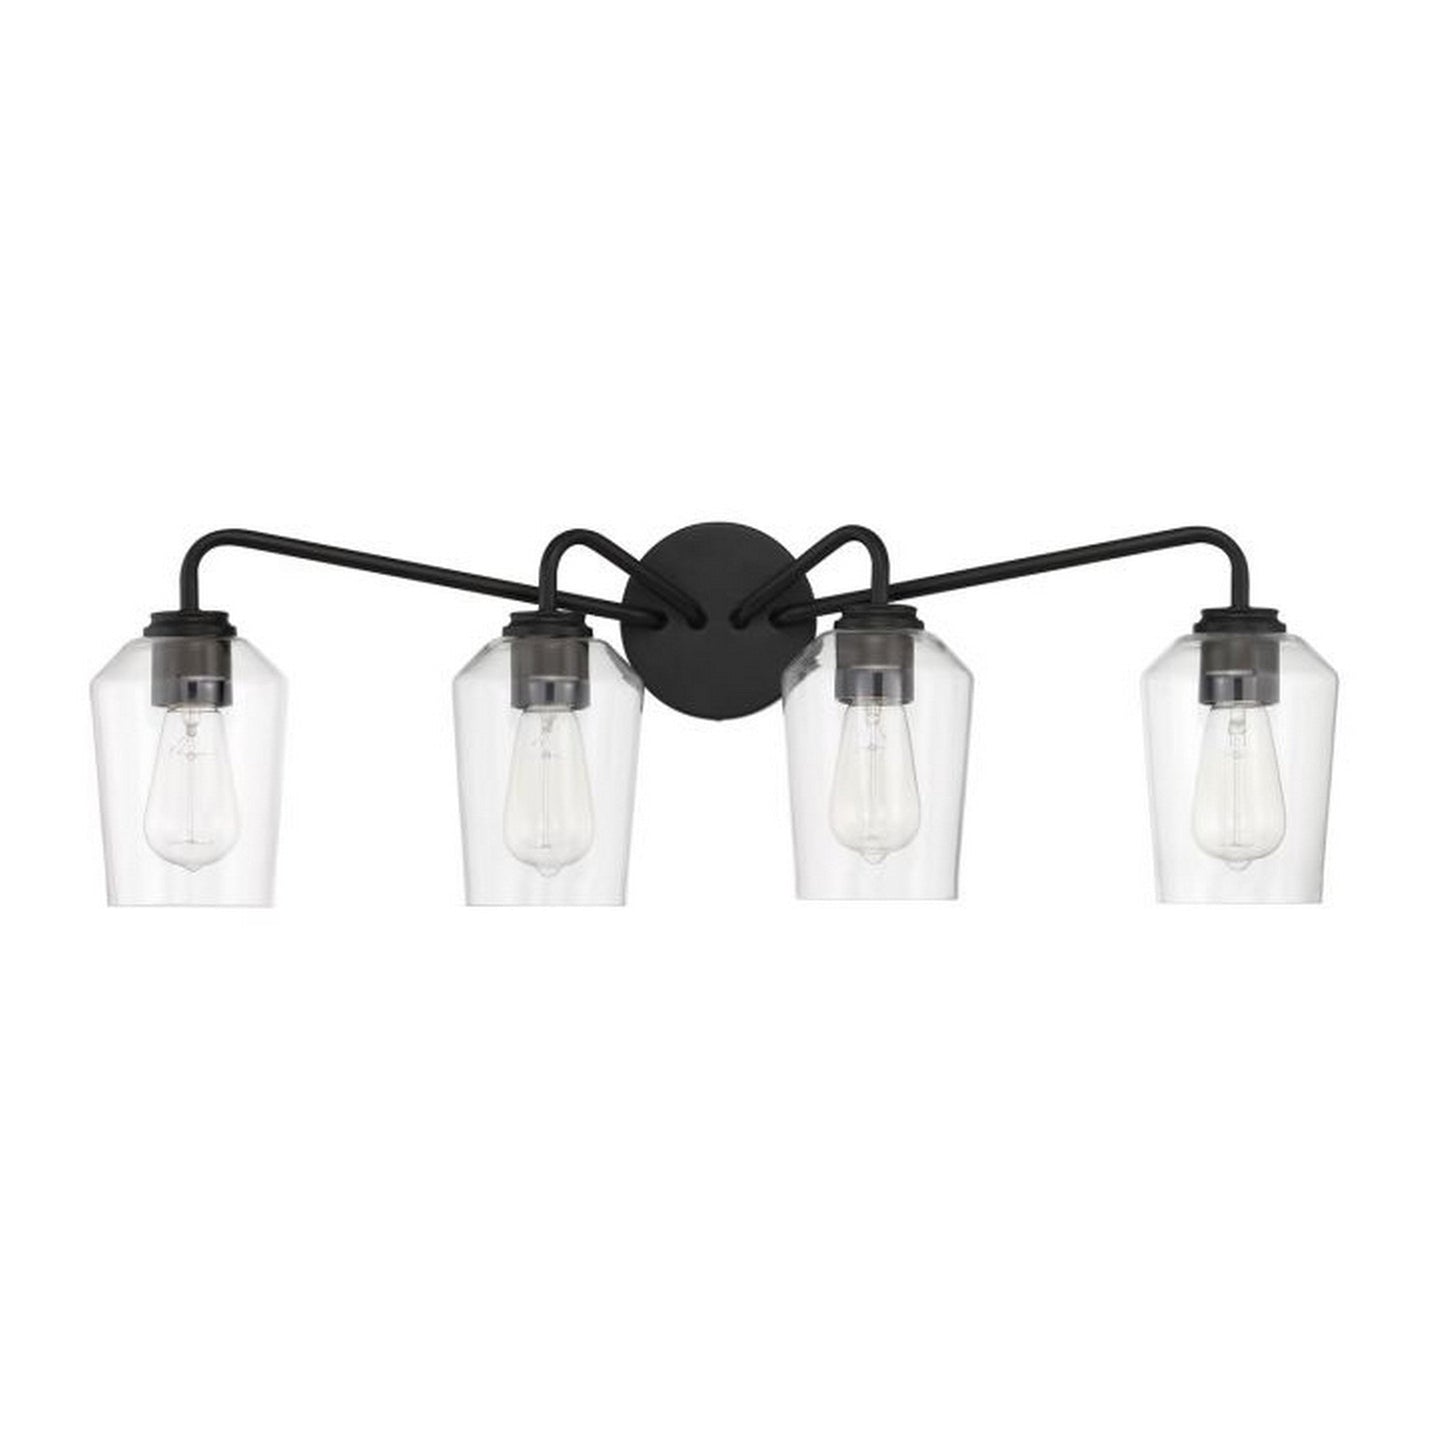 Craftmade Shayna 31" 4-Light Flat Black Vanity Light With Clear Glass Shades